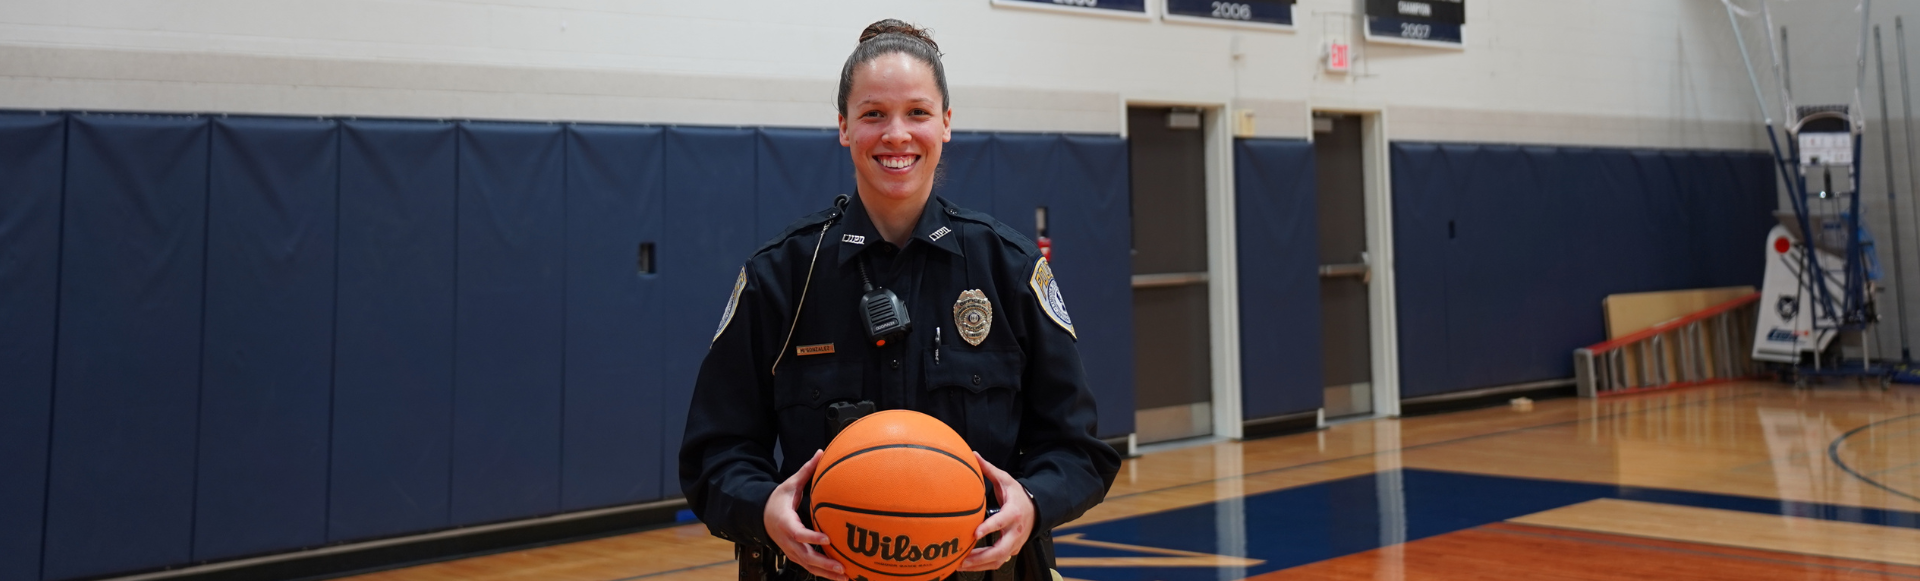 Mercy Marie Gonzalez, Lincoln University of Missouri senior, member of the Blue Tiger Women’s Basketball team, and one of the newest members of the Lincoln University Police Department (LUPD) — the word “team” means a lot.